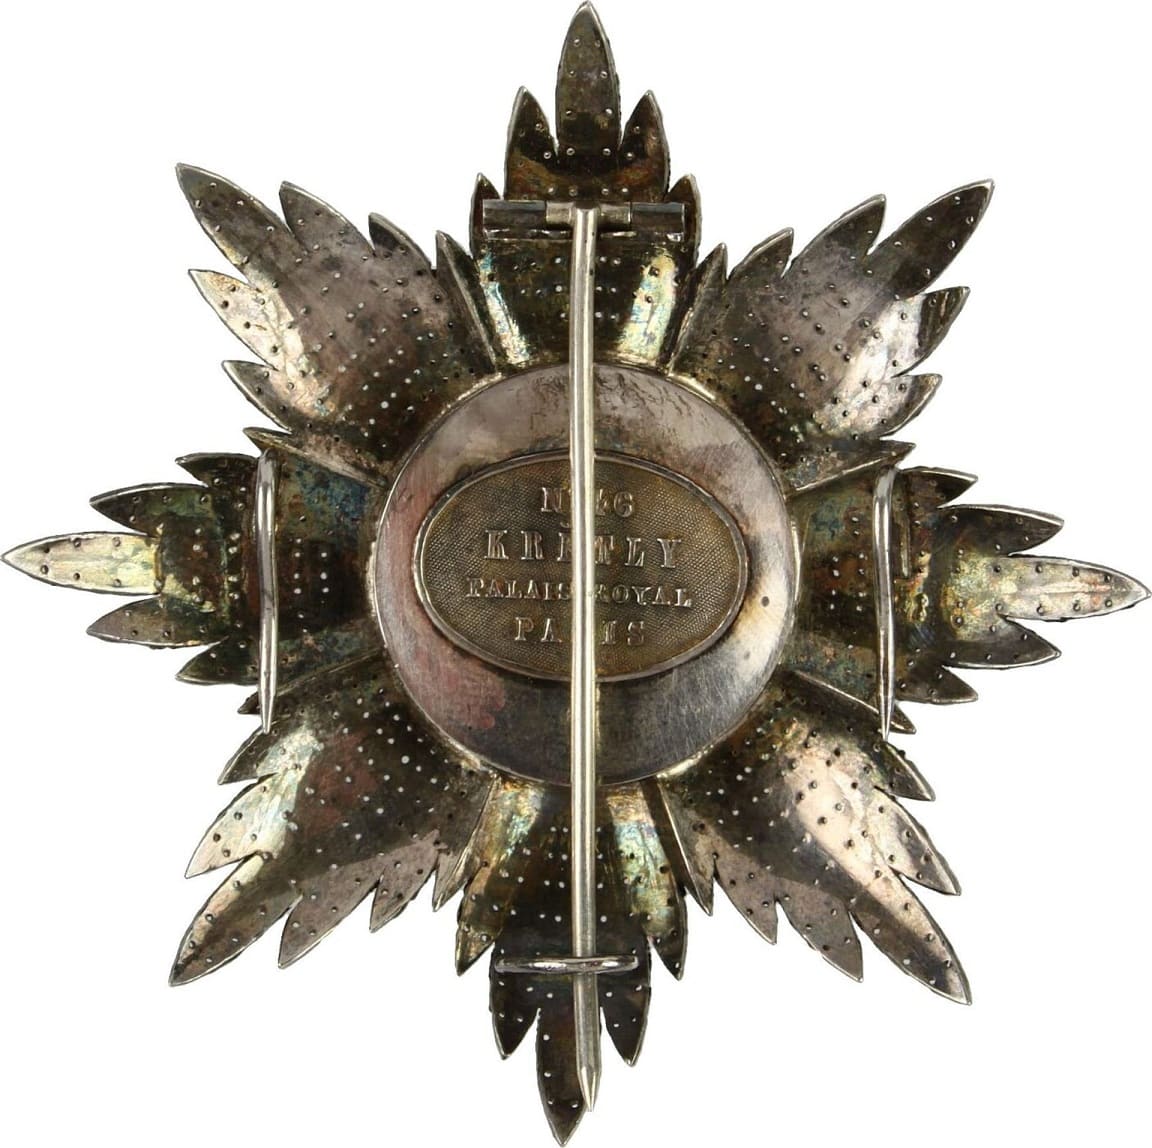 Order of  the Elephant Breast Star made by Kretly.jpg